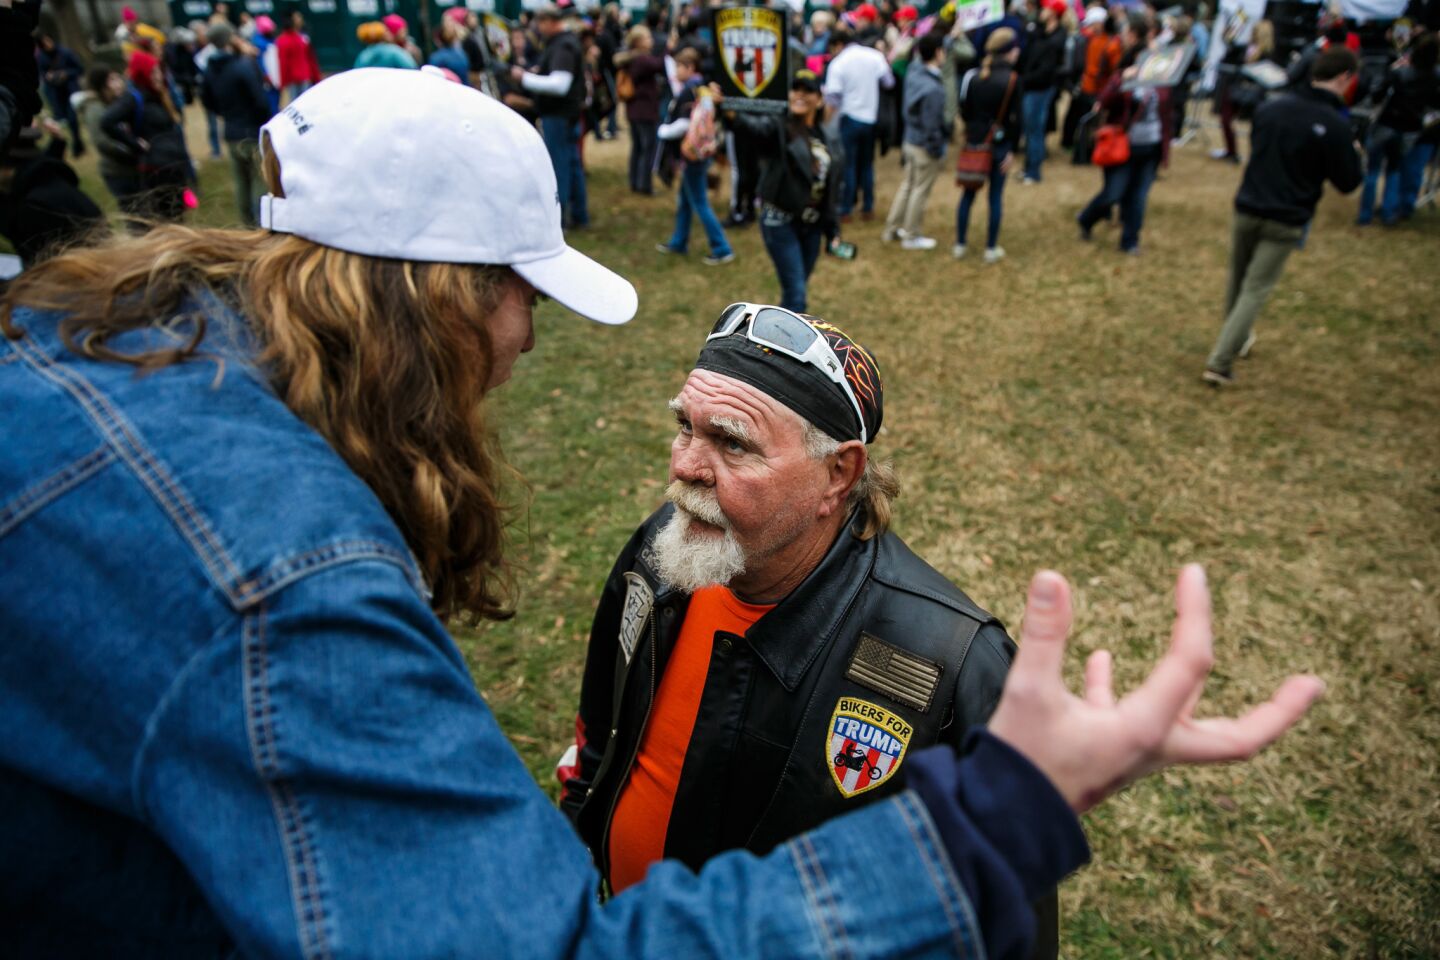 Julia Hook, left, debates to R.C. Pittman, member of Bikers for Trump, as they discuss political views and values. At the end of the conversation they agreed on one thing: a peaceful protest and coming together to reason.